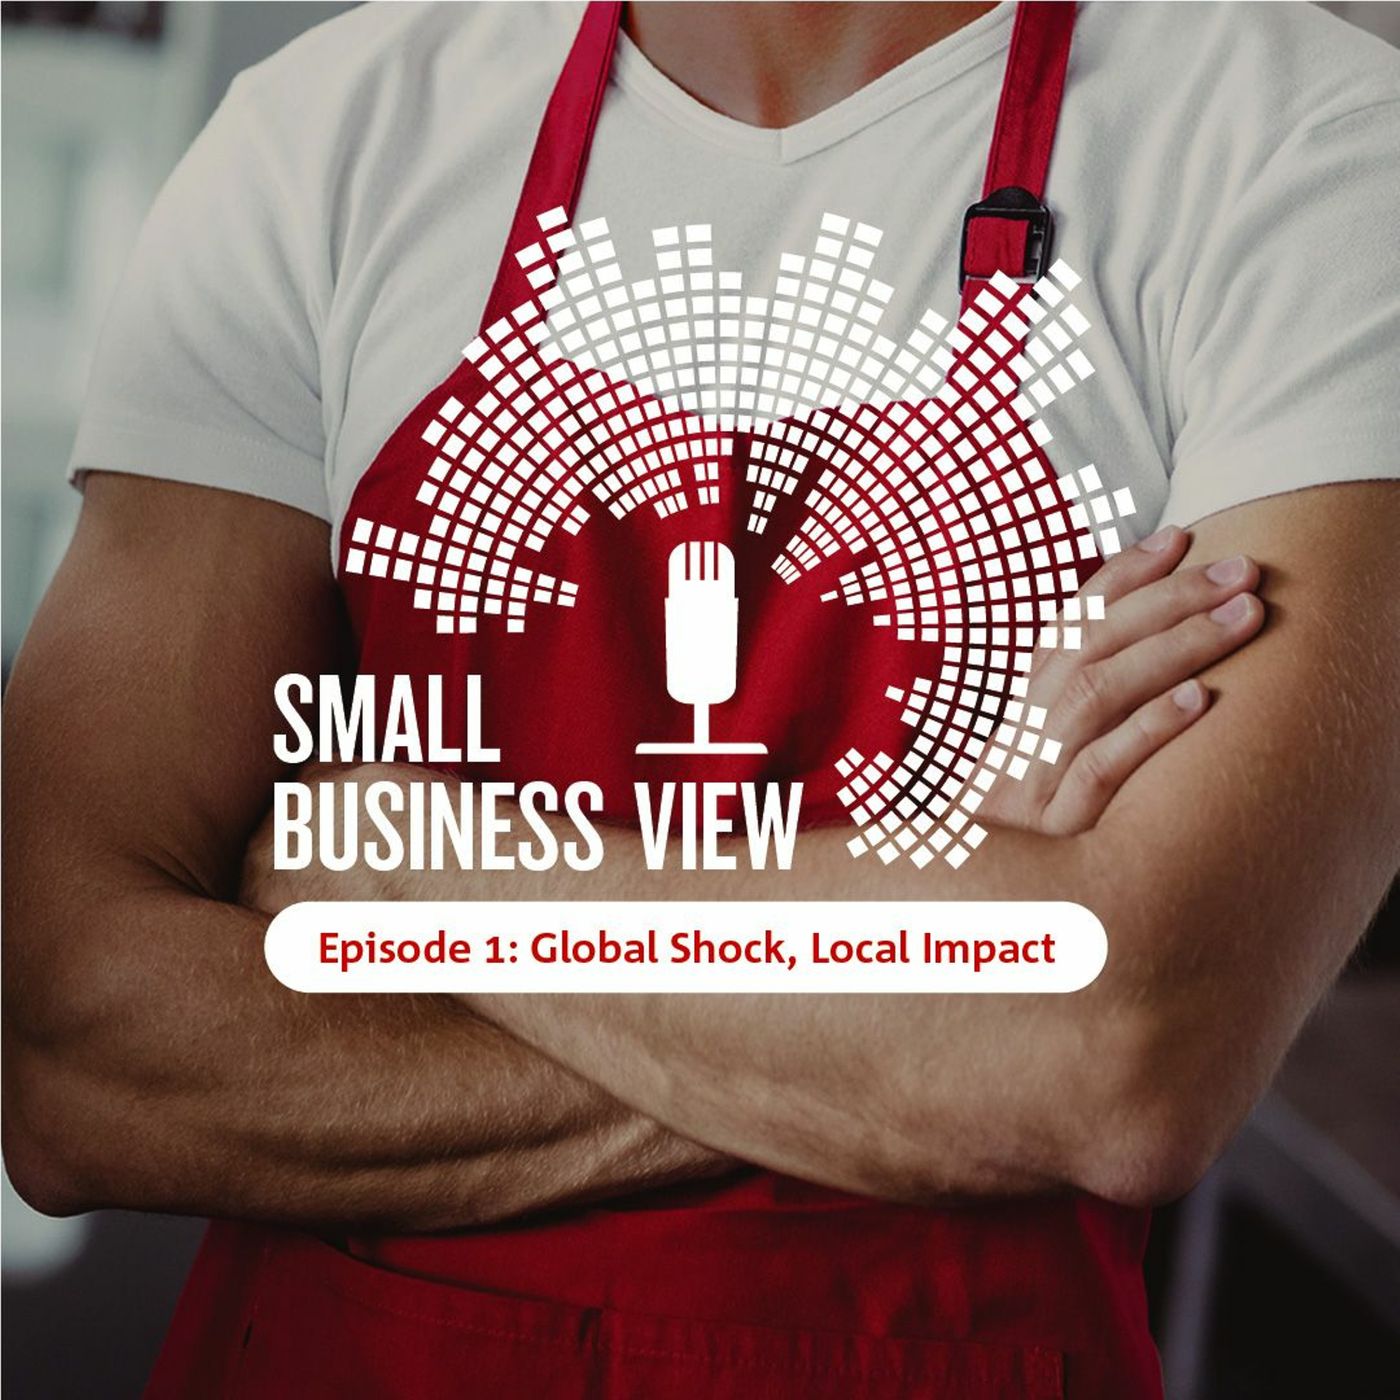 Small Business View Episode 1:Global shock, local impact